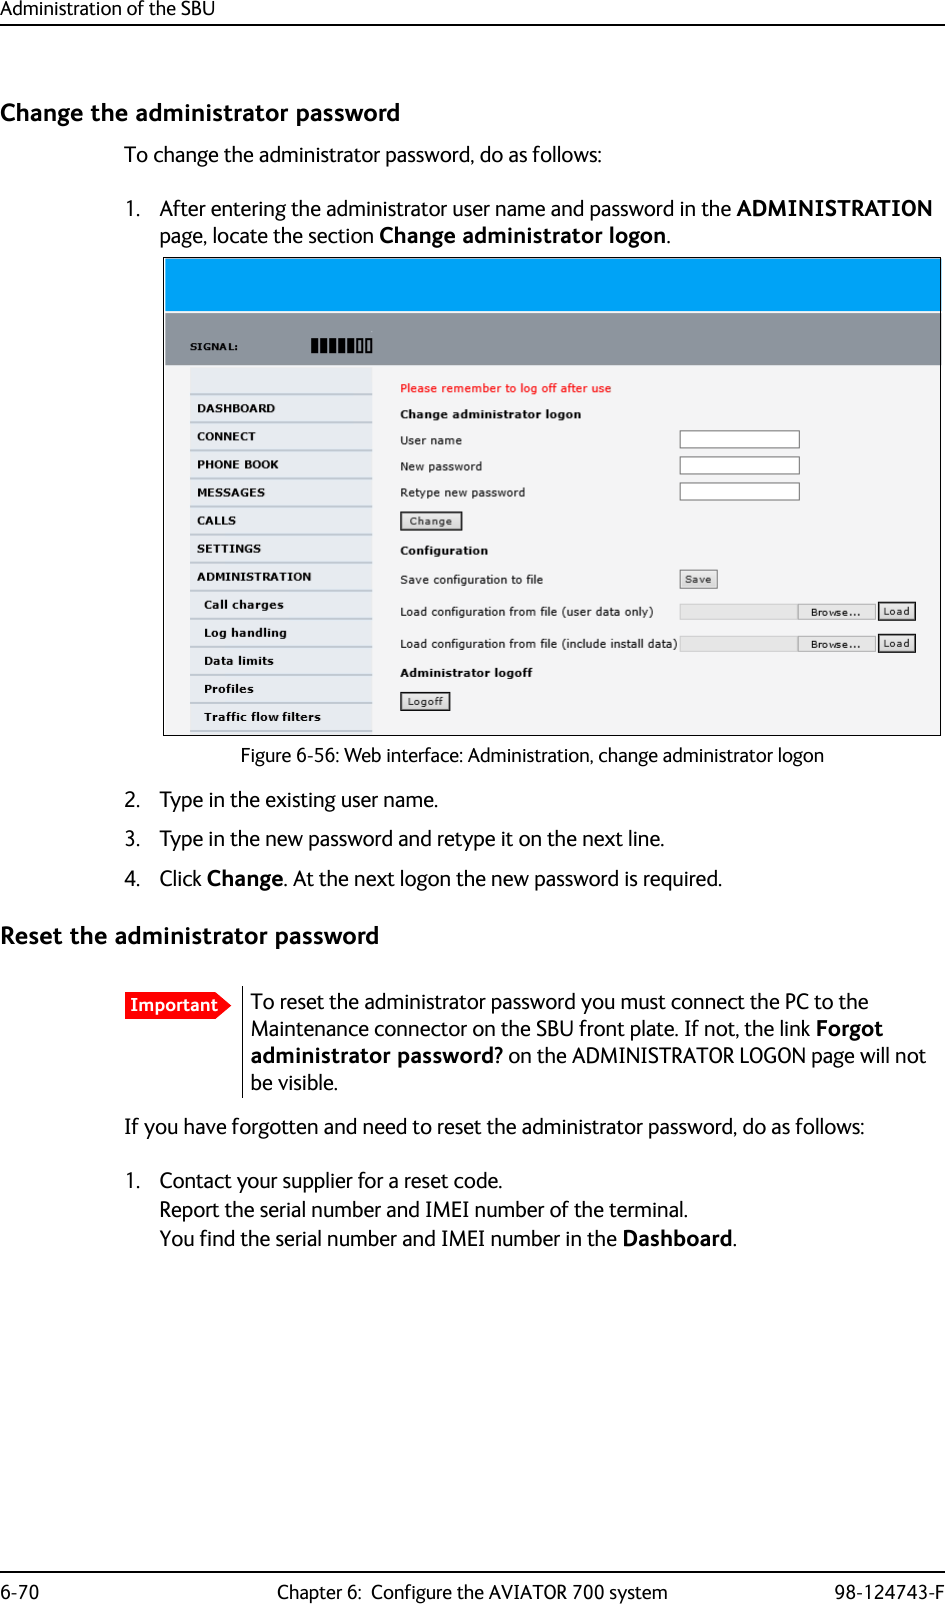 Administration of the SBU6-70 Chapter 6:  Configure the AVIATOR 700 system 98-124743-FChange the administrator passwordTo change the administrator password, do as follows:1. After entering the administrator user name and password in the ADMINISTRATION page, locate the section Change administrator logon.Figure 6-56: Web interface: Administration, change administrator logon2. Type in the existing user name.3. Type in the new password and retype it on the next line.4. Click Change. At the next logon the new password is required.Reset the administrator passwordIf you have forgotten and need to reset the administrator password, do as follows:1. Contact your supplier for a reset code.Report the serial number and IMEI number of the terminal.You find the serial number and IMEI number in the Dashboard.ImportantTo reset the administrator password you must connect the PC to the Maintenance connector on the SBU front plate. If not, the link Forgot administrator password? on the ADMINISTRATOR LOGON page will not be visible.